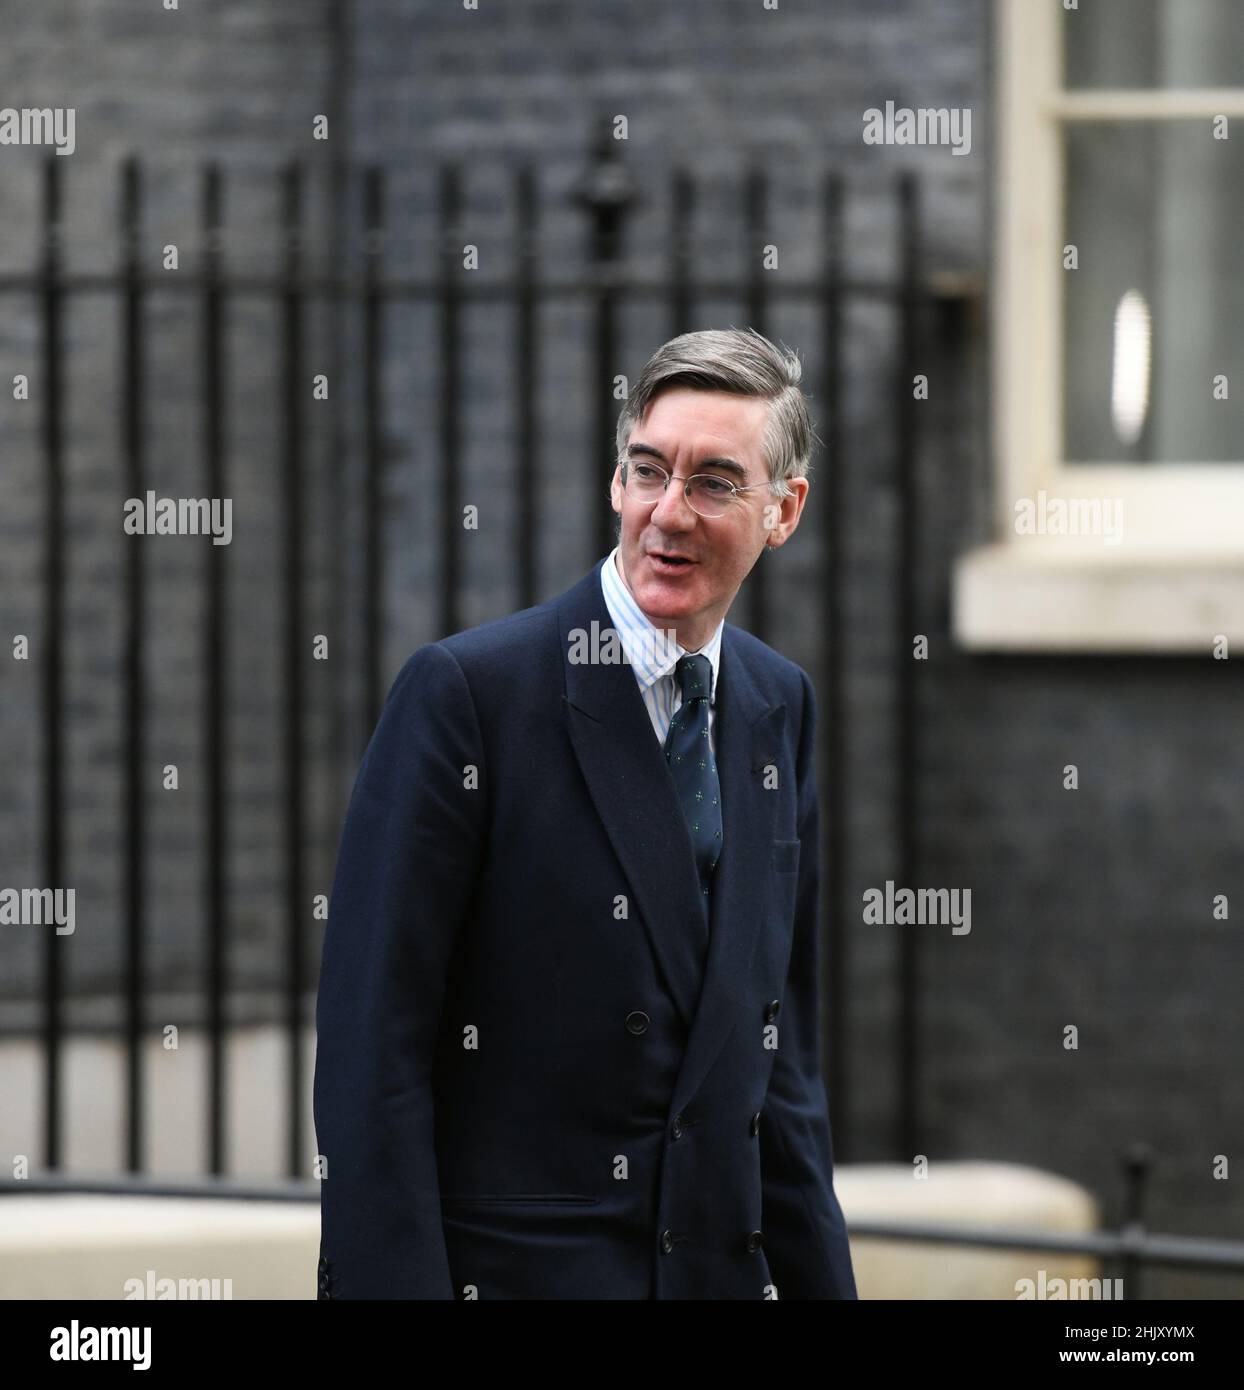 Downing Street, London, UK. 1 February 2022. Jacob Rees-Mogg MP, Lord President of the Council, Leader of the Commons in Downing Street for weekly cabinet meeting. Credit: Malcolm Park/Alamy Live News. Stock Photo